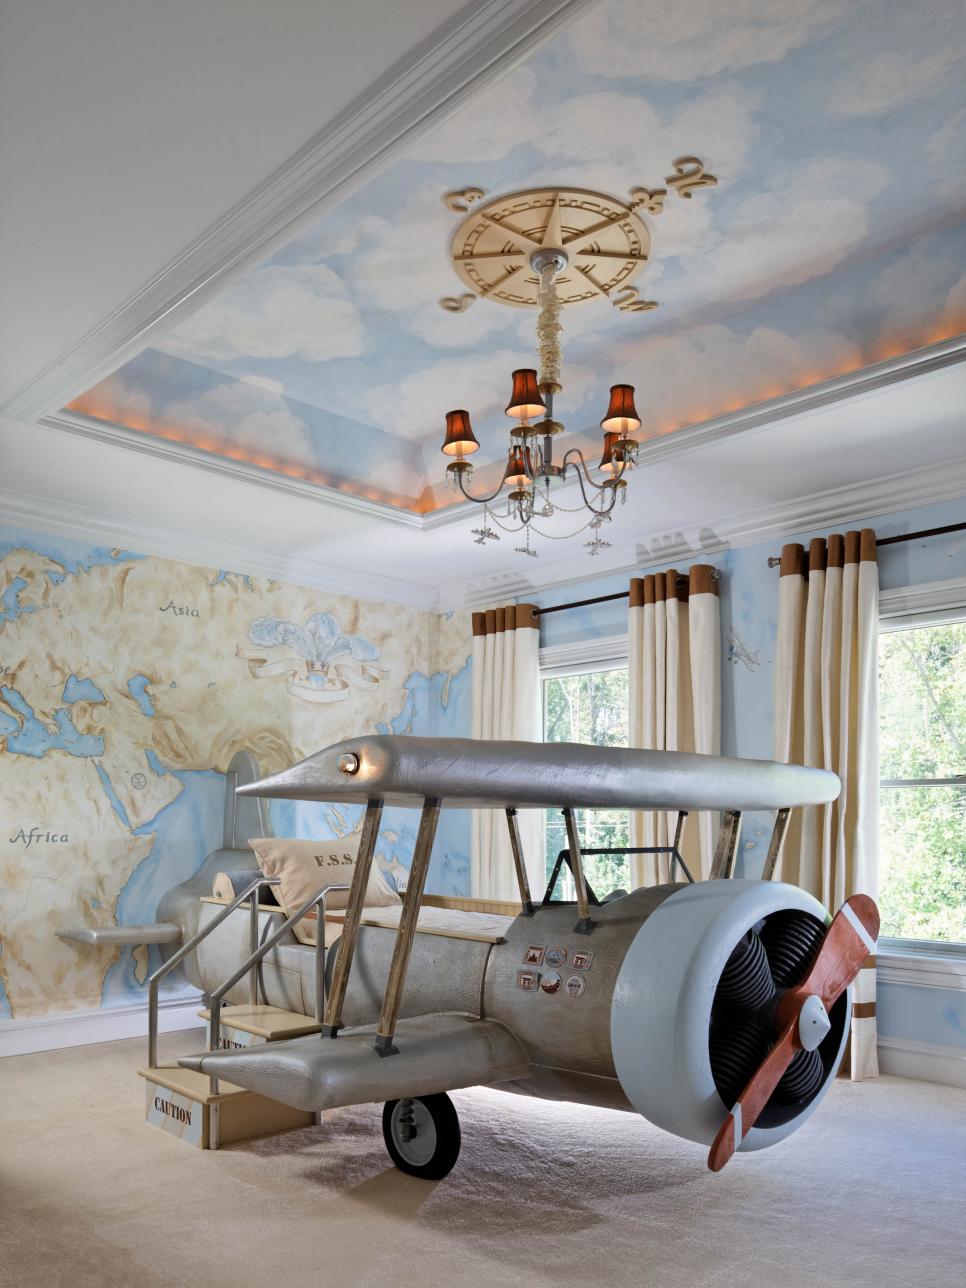 Kid's Bedroom With Airplane-Shaped Bed, Map Mural and Tray Ceiling